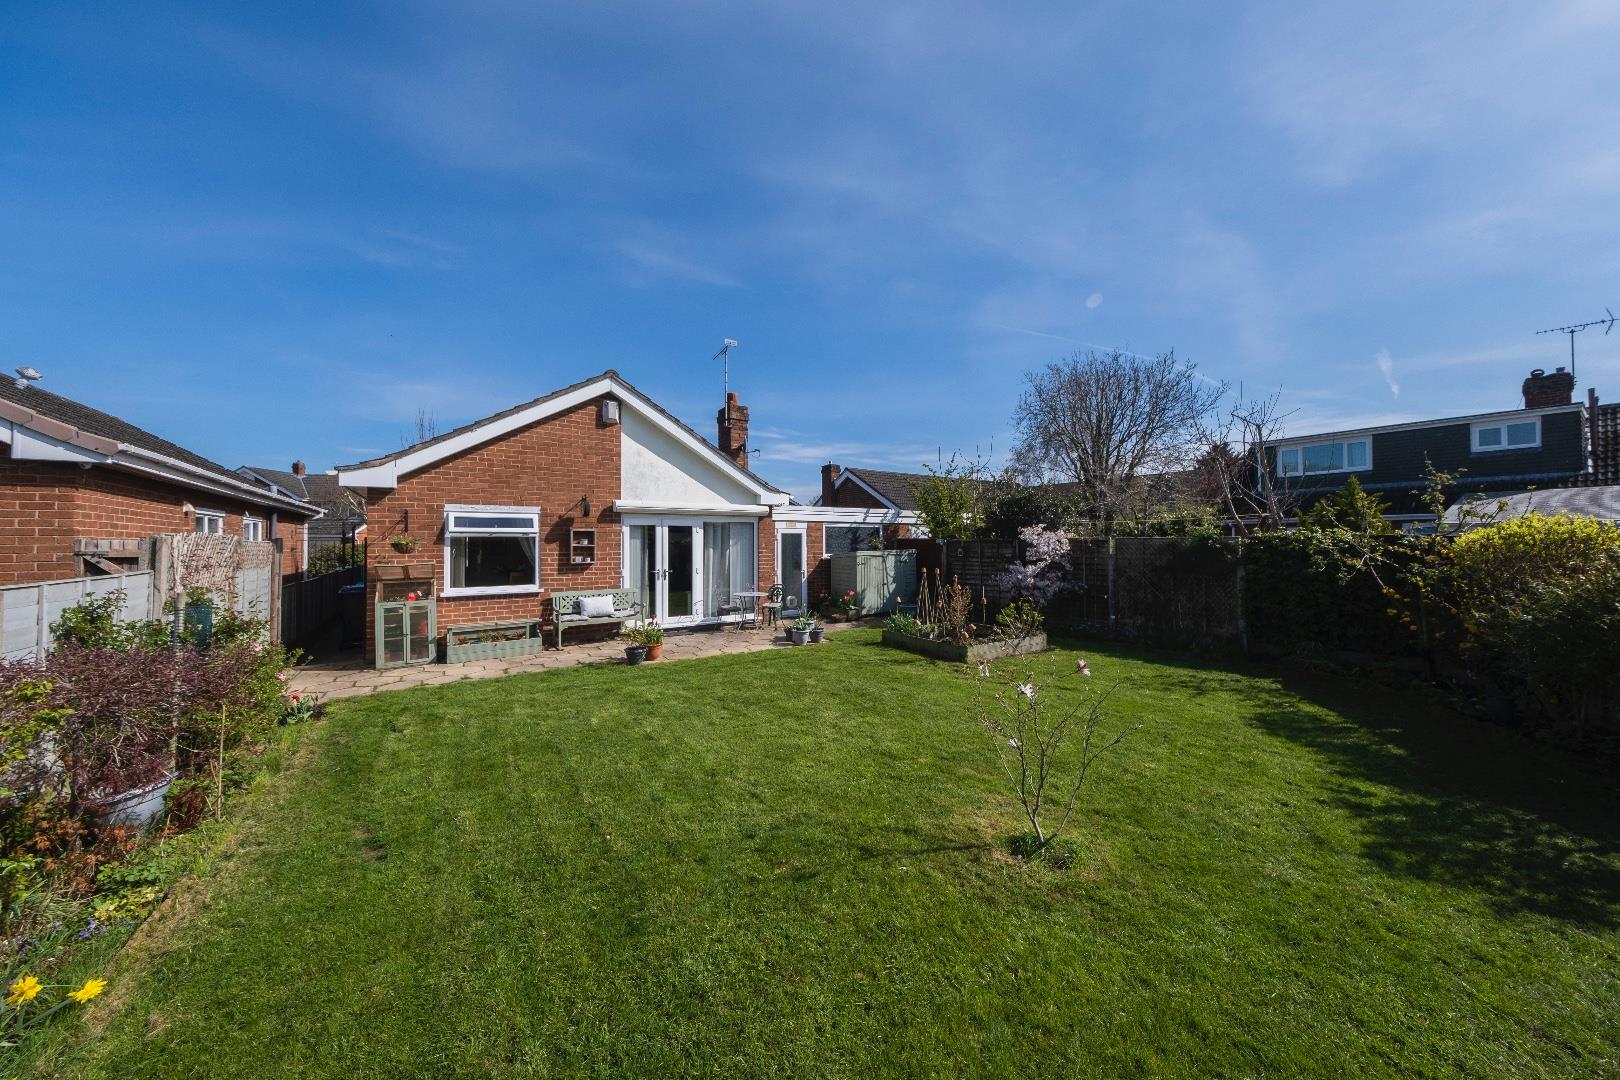 2 bedroom  Detached Bungalow for Sale in Upton